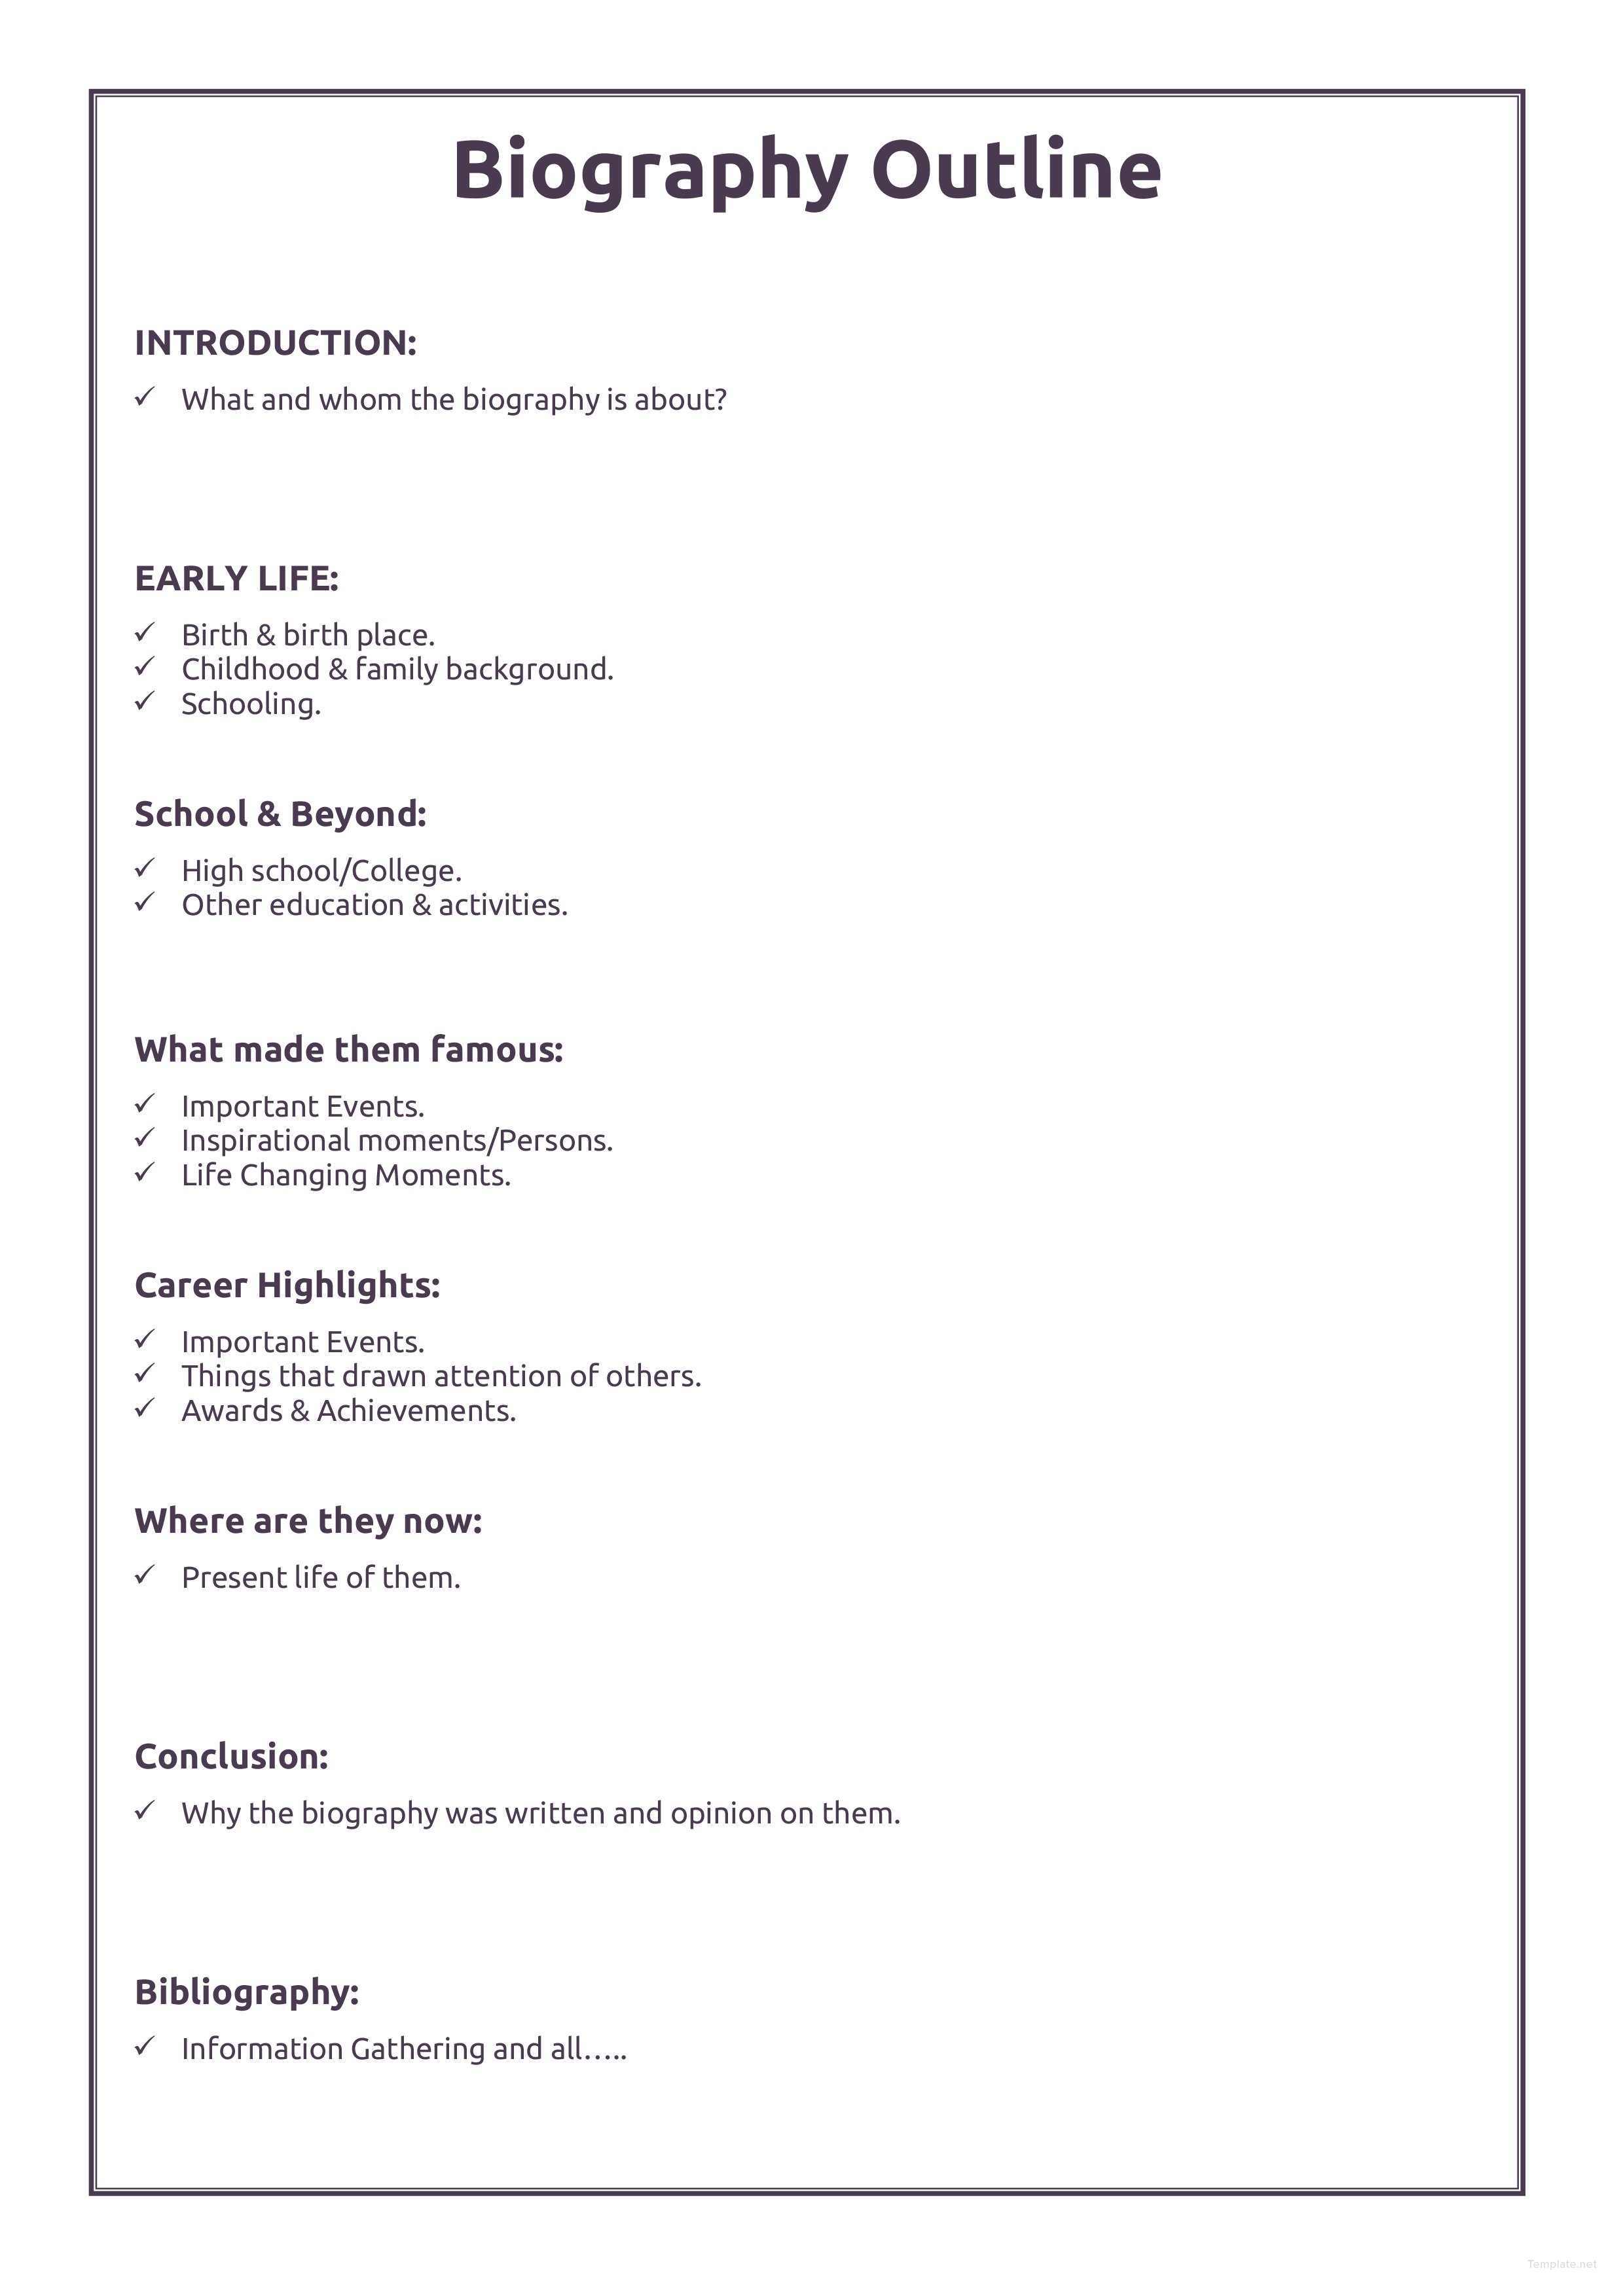 Professional Biography Outline Template in Microsoft Word